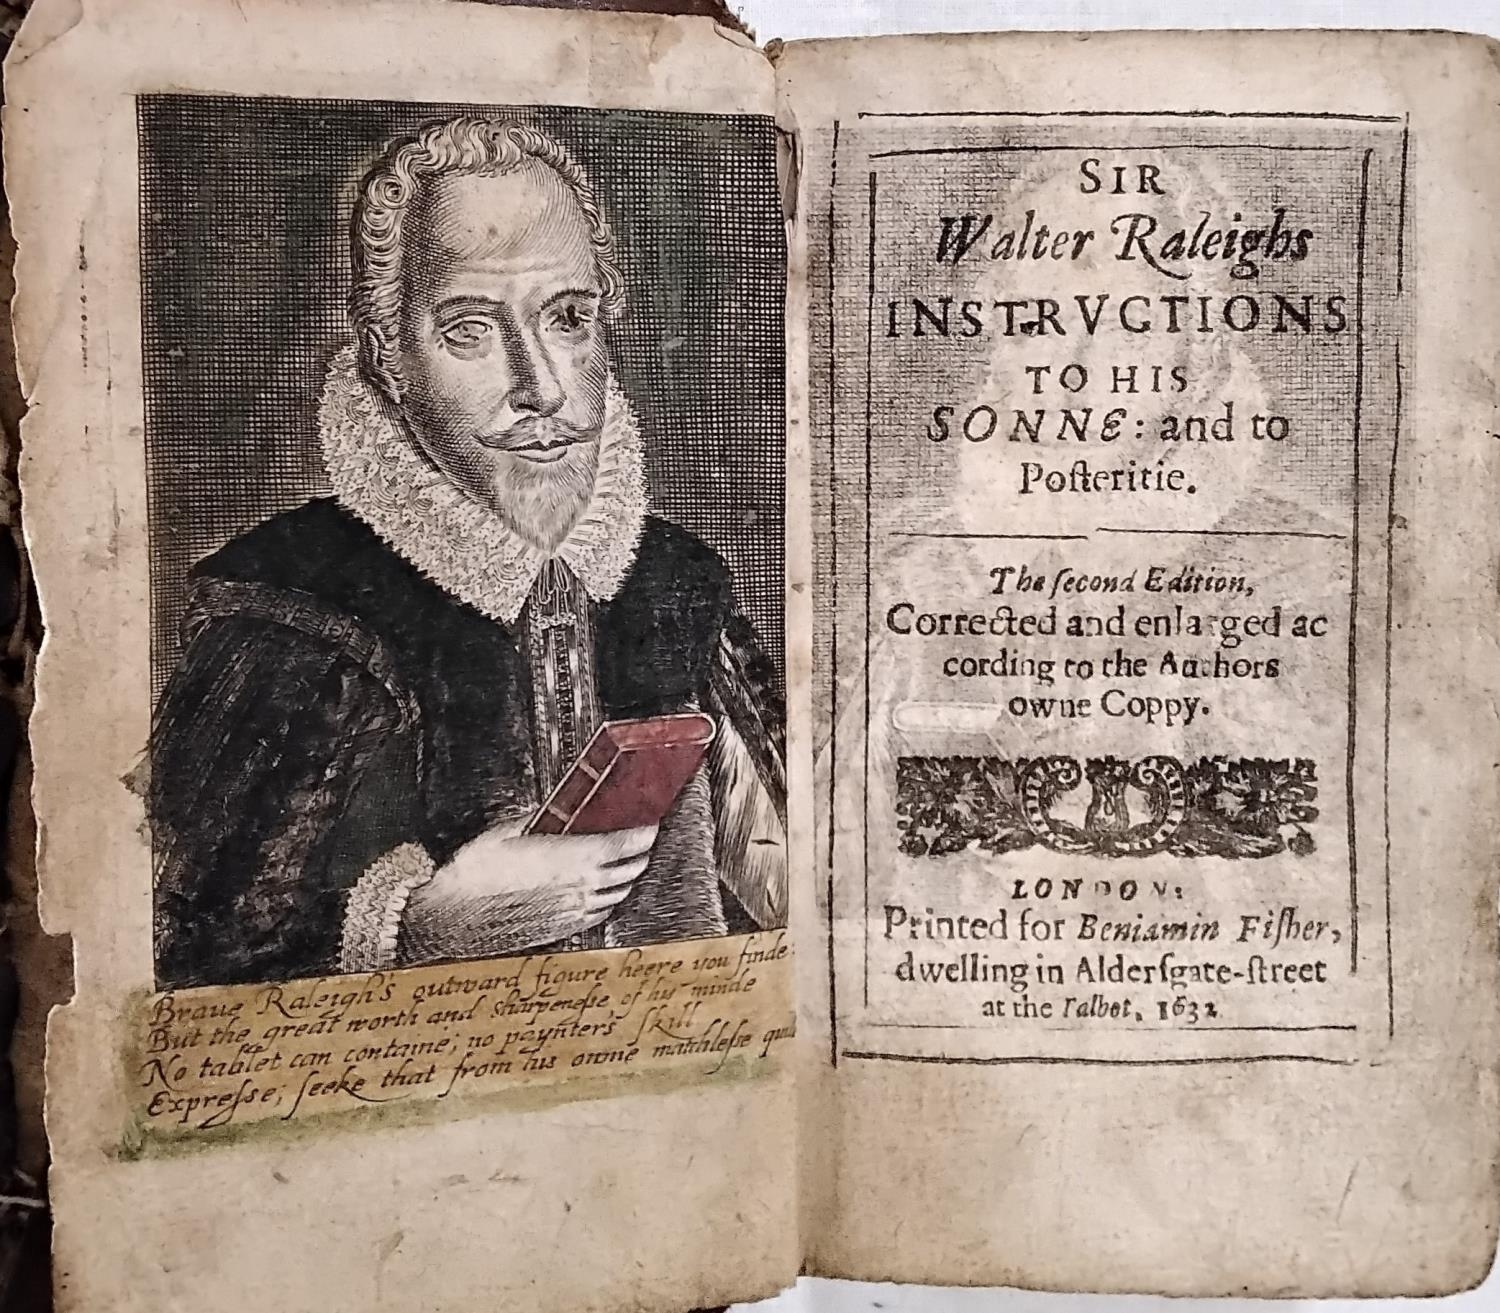 Raleigh, Sir, Walter, Instruction to his son and posterity, second edition, printed for Benjamin